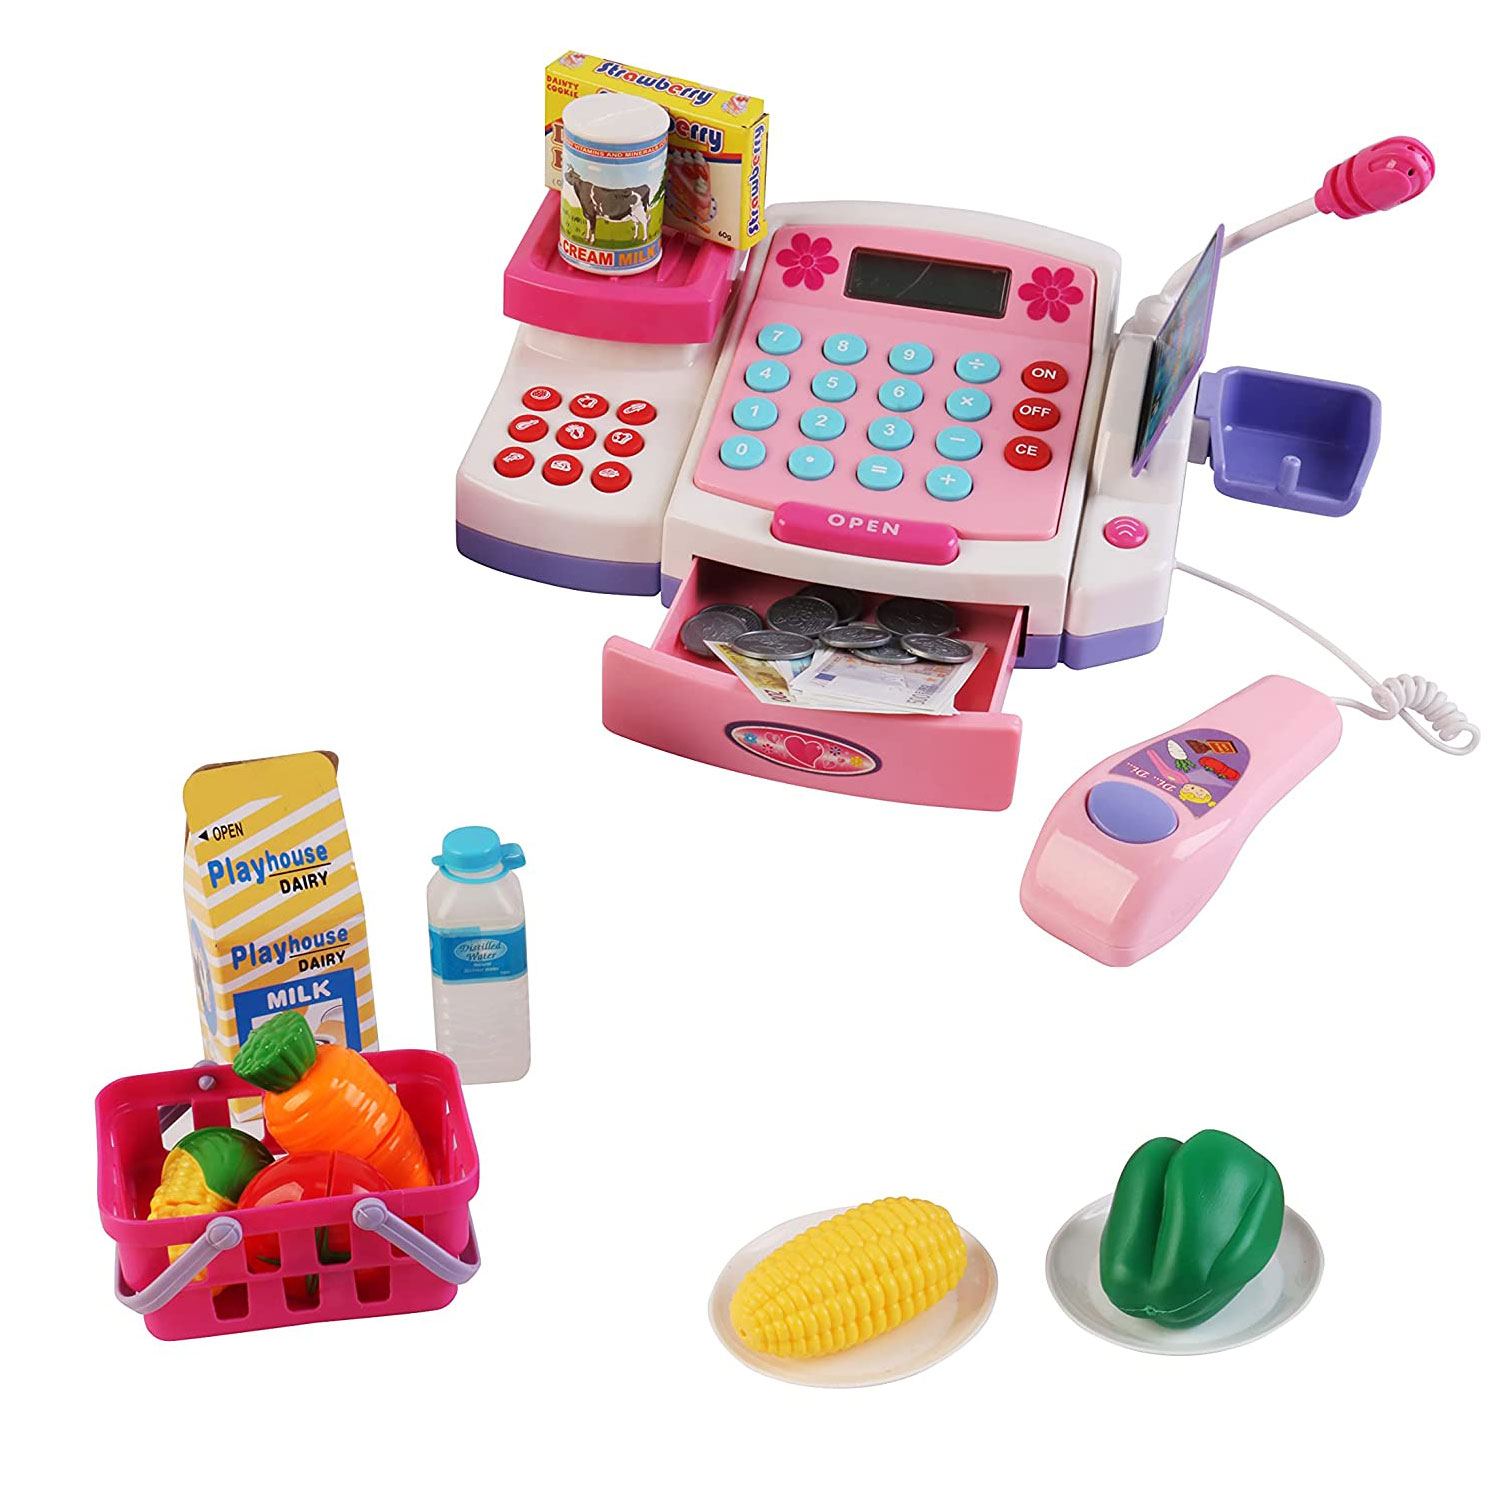 Toy Cash Register with Microphone Calculator Grocery Items Shopping Basket Scanner and Pretend Play Money Kids Supermarket Cashier Bank for Preschool Children Boys Girls Toddlers TB-71